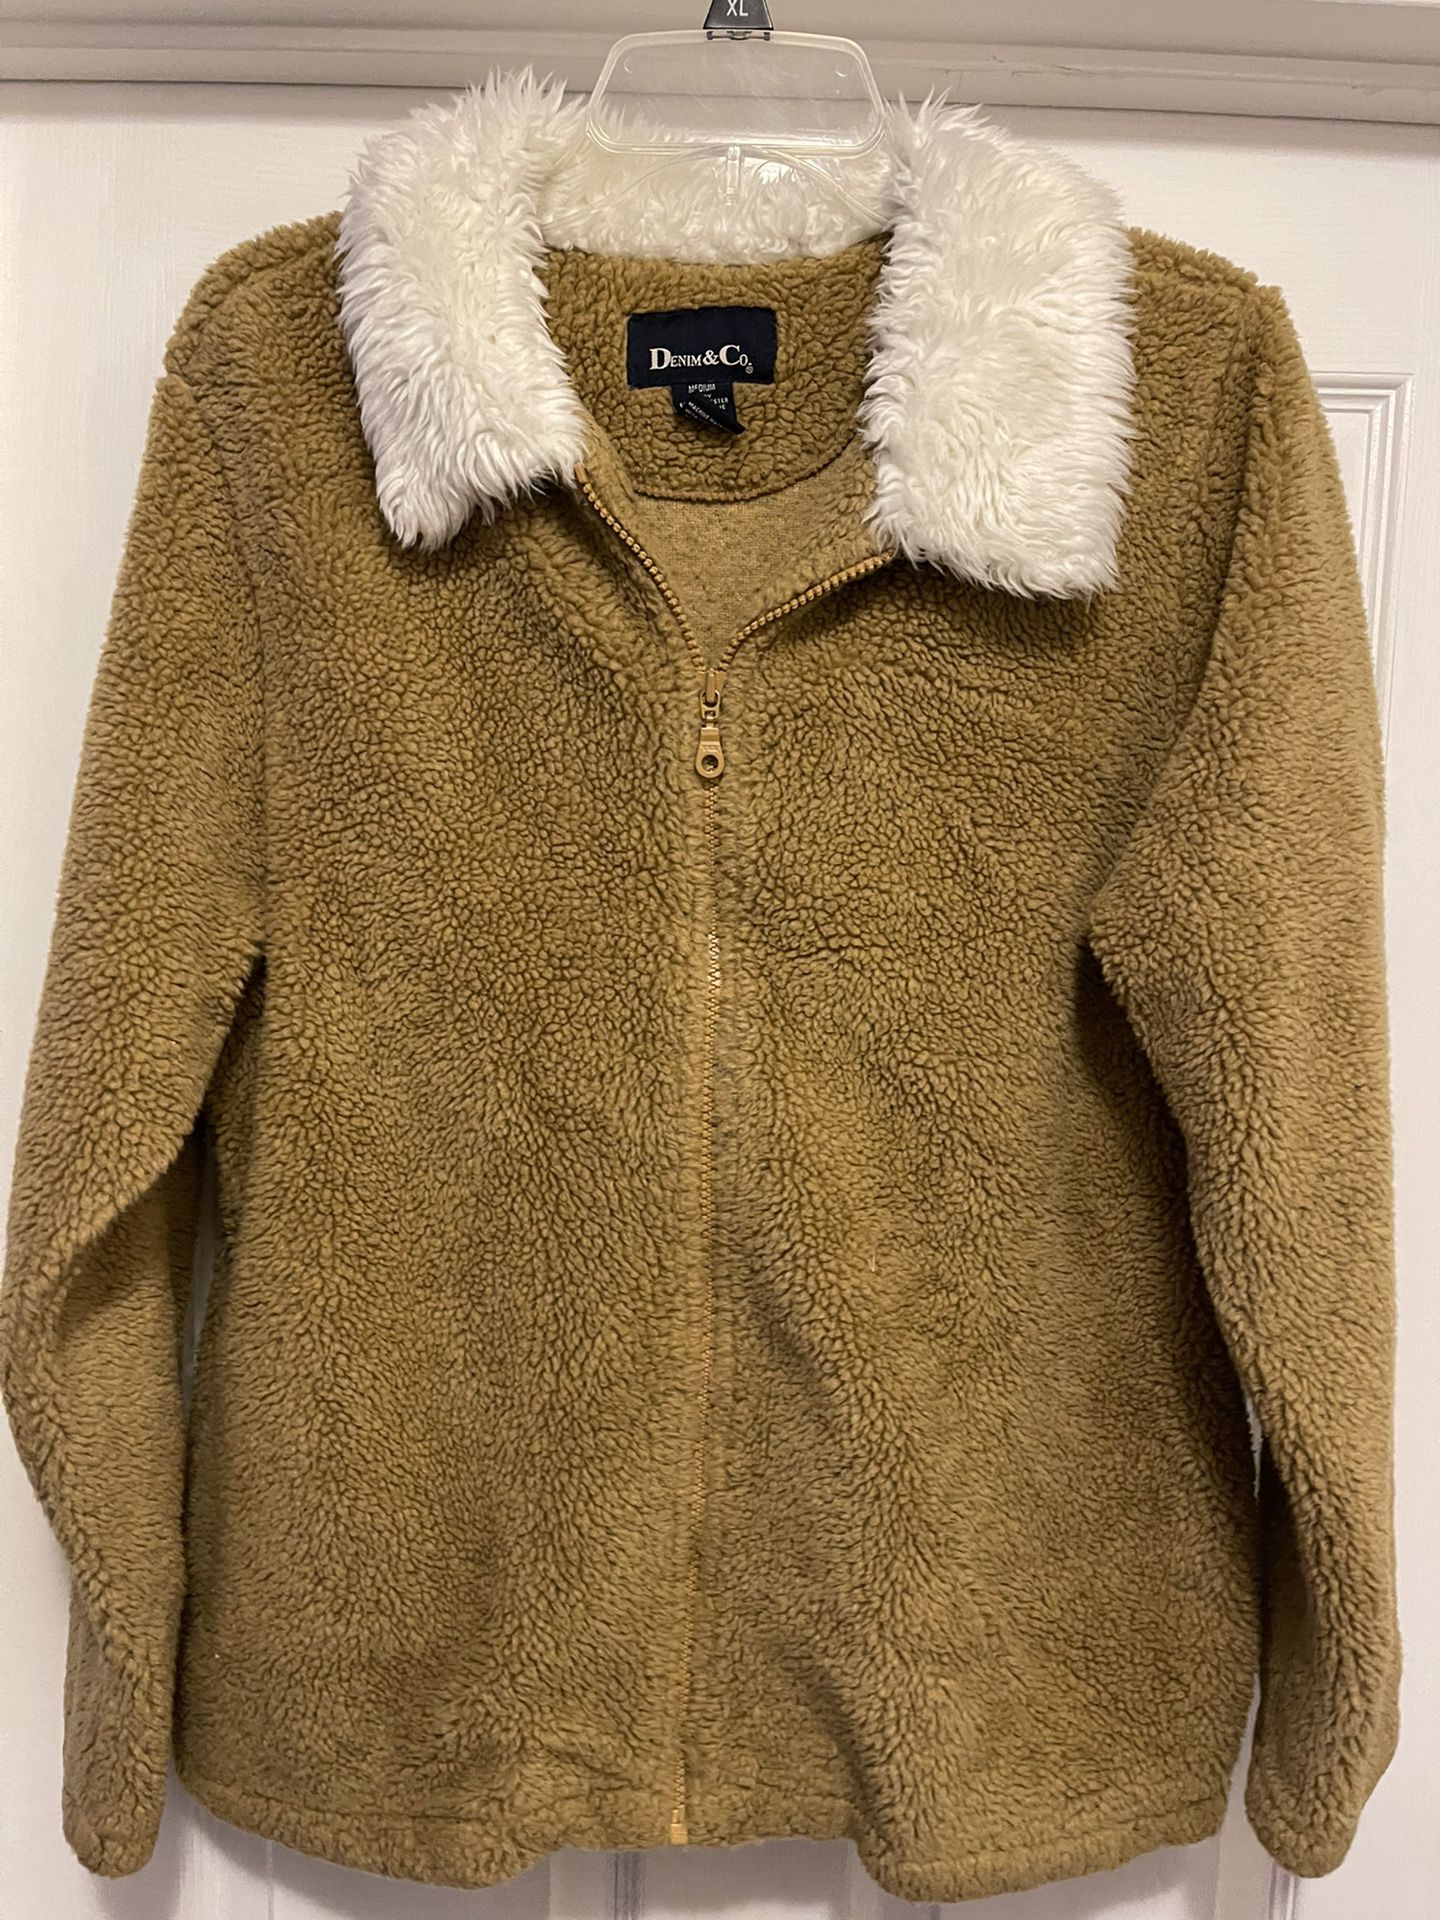 Denim And Co. Sherpa Jacket with Faux Fur Collar Size Medium Goldenrod Brown 